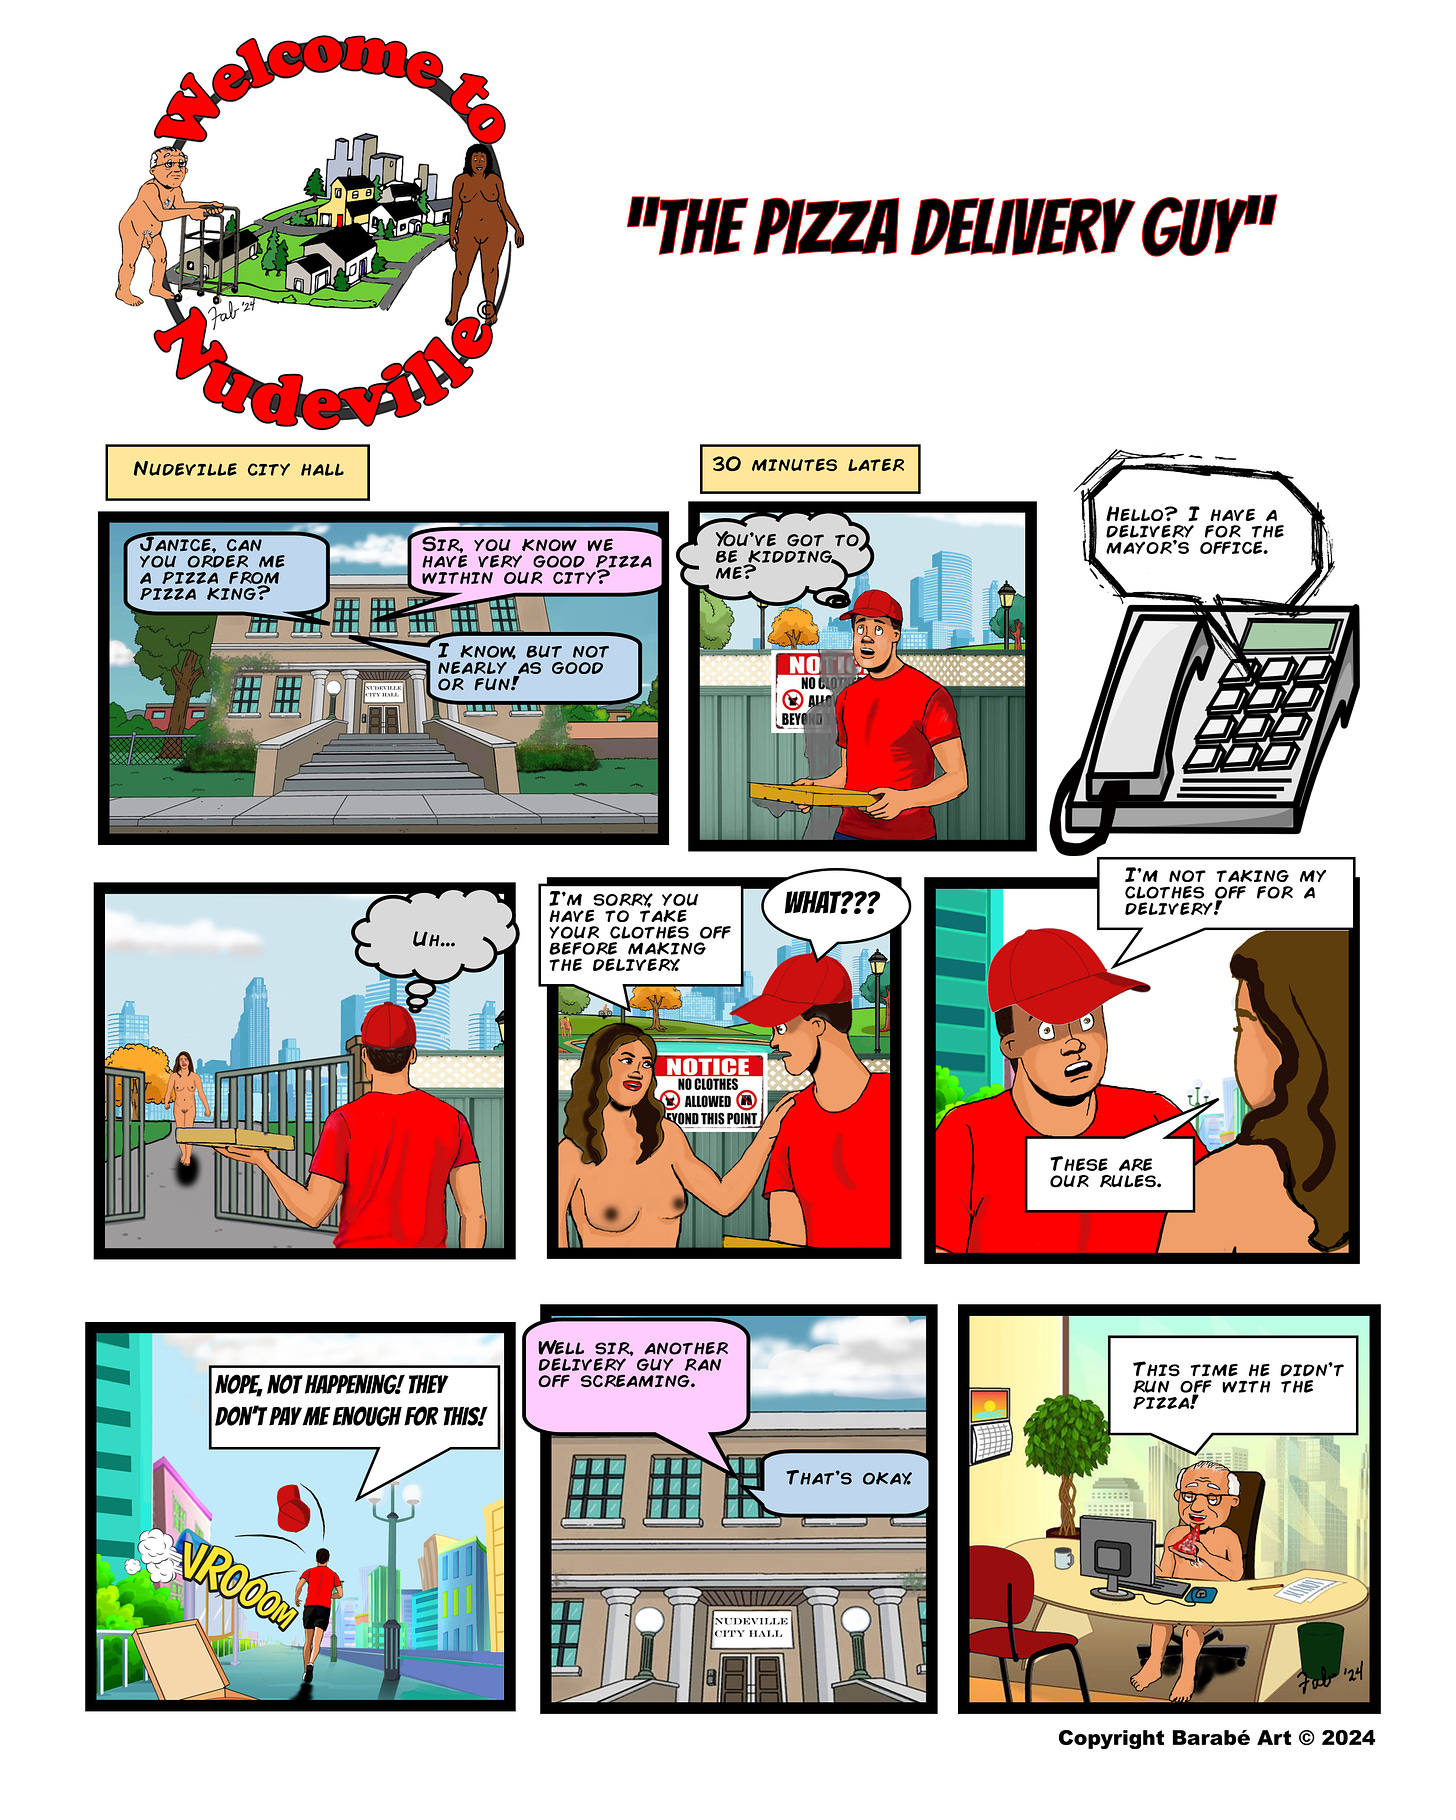 Title: "Welcome to Nudeville" Subtitle: "The Pizza Delivery Guy" Panel 1: Caption: "Nudeville City Hall" Inside City Hall, the mayor asks his assistant, "Janice, can you order me a pizza from Pizza King?" The assistant replies, "Sir, you know we have very good pizza within our city?" The man responds, "I know but not nearly as good or fun!" Panel 2: Caption: "30 minutes later" A pizza delivery guy arrives outside the gated entrance to Nudeville, looking at a sign that reads, "NO CLOTHES ALLOWED BEYOND THIS POINT." He exclaims, "You've got to be kidding me?!" Panel 3: Through a touchtone telephone on speaker phone, "Hello? I have a delivery for the mayor's office." Panel 4: A nude woman approaches the delivery guy at the gate. The guy thinks, “Uh…” Panel 5: At the gate, the nude woman tells the delivery guy, "I'm sorry you have to take your clothes off before making the delivery." The delivery guy looks shocked and replies, "WHAT???" Panel 6: The delivery guy, still holding the pizza, says, "I'm not taking my clothes off for a delivery!" The woman responds, "These are our rules." Panel 7: The delivery guy says, "Nope, not happening! They don't pay me enough for this!" as he runs away, his hat flying off. Panel 8: Back at City Hall, Janice tells the mayor, "Well sir, another delivery guy ran off screaming." The mayor responds, "That's okay." Panel 9: The mayor at his desk with the pizza in front of him adds, "This time he didn't run off with the pizza!" Copyright Barabé Art 2024